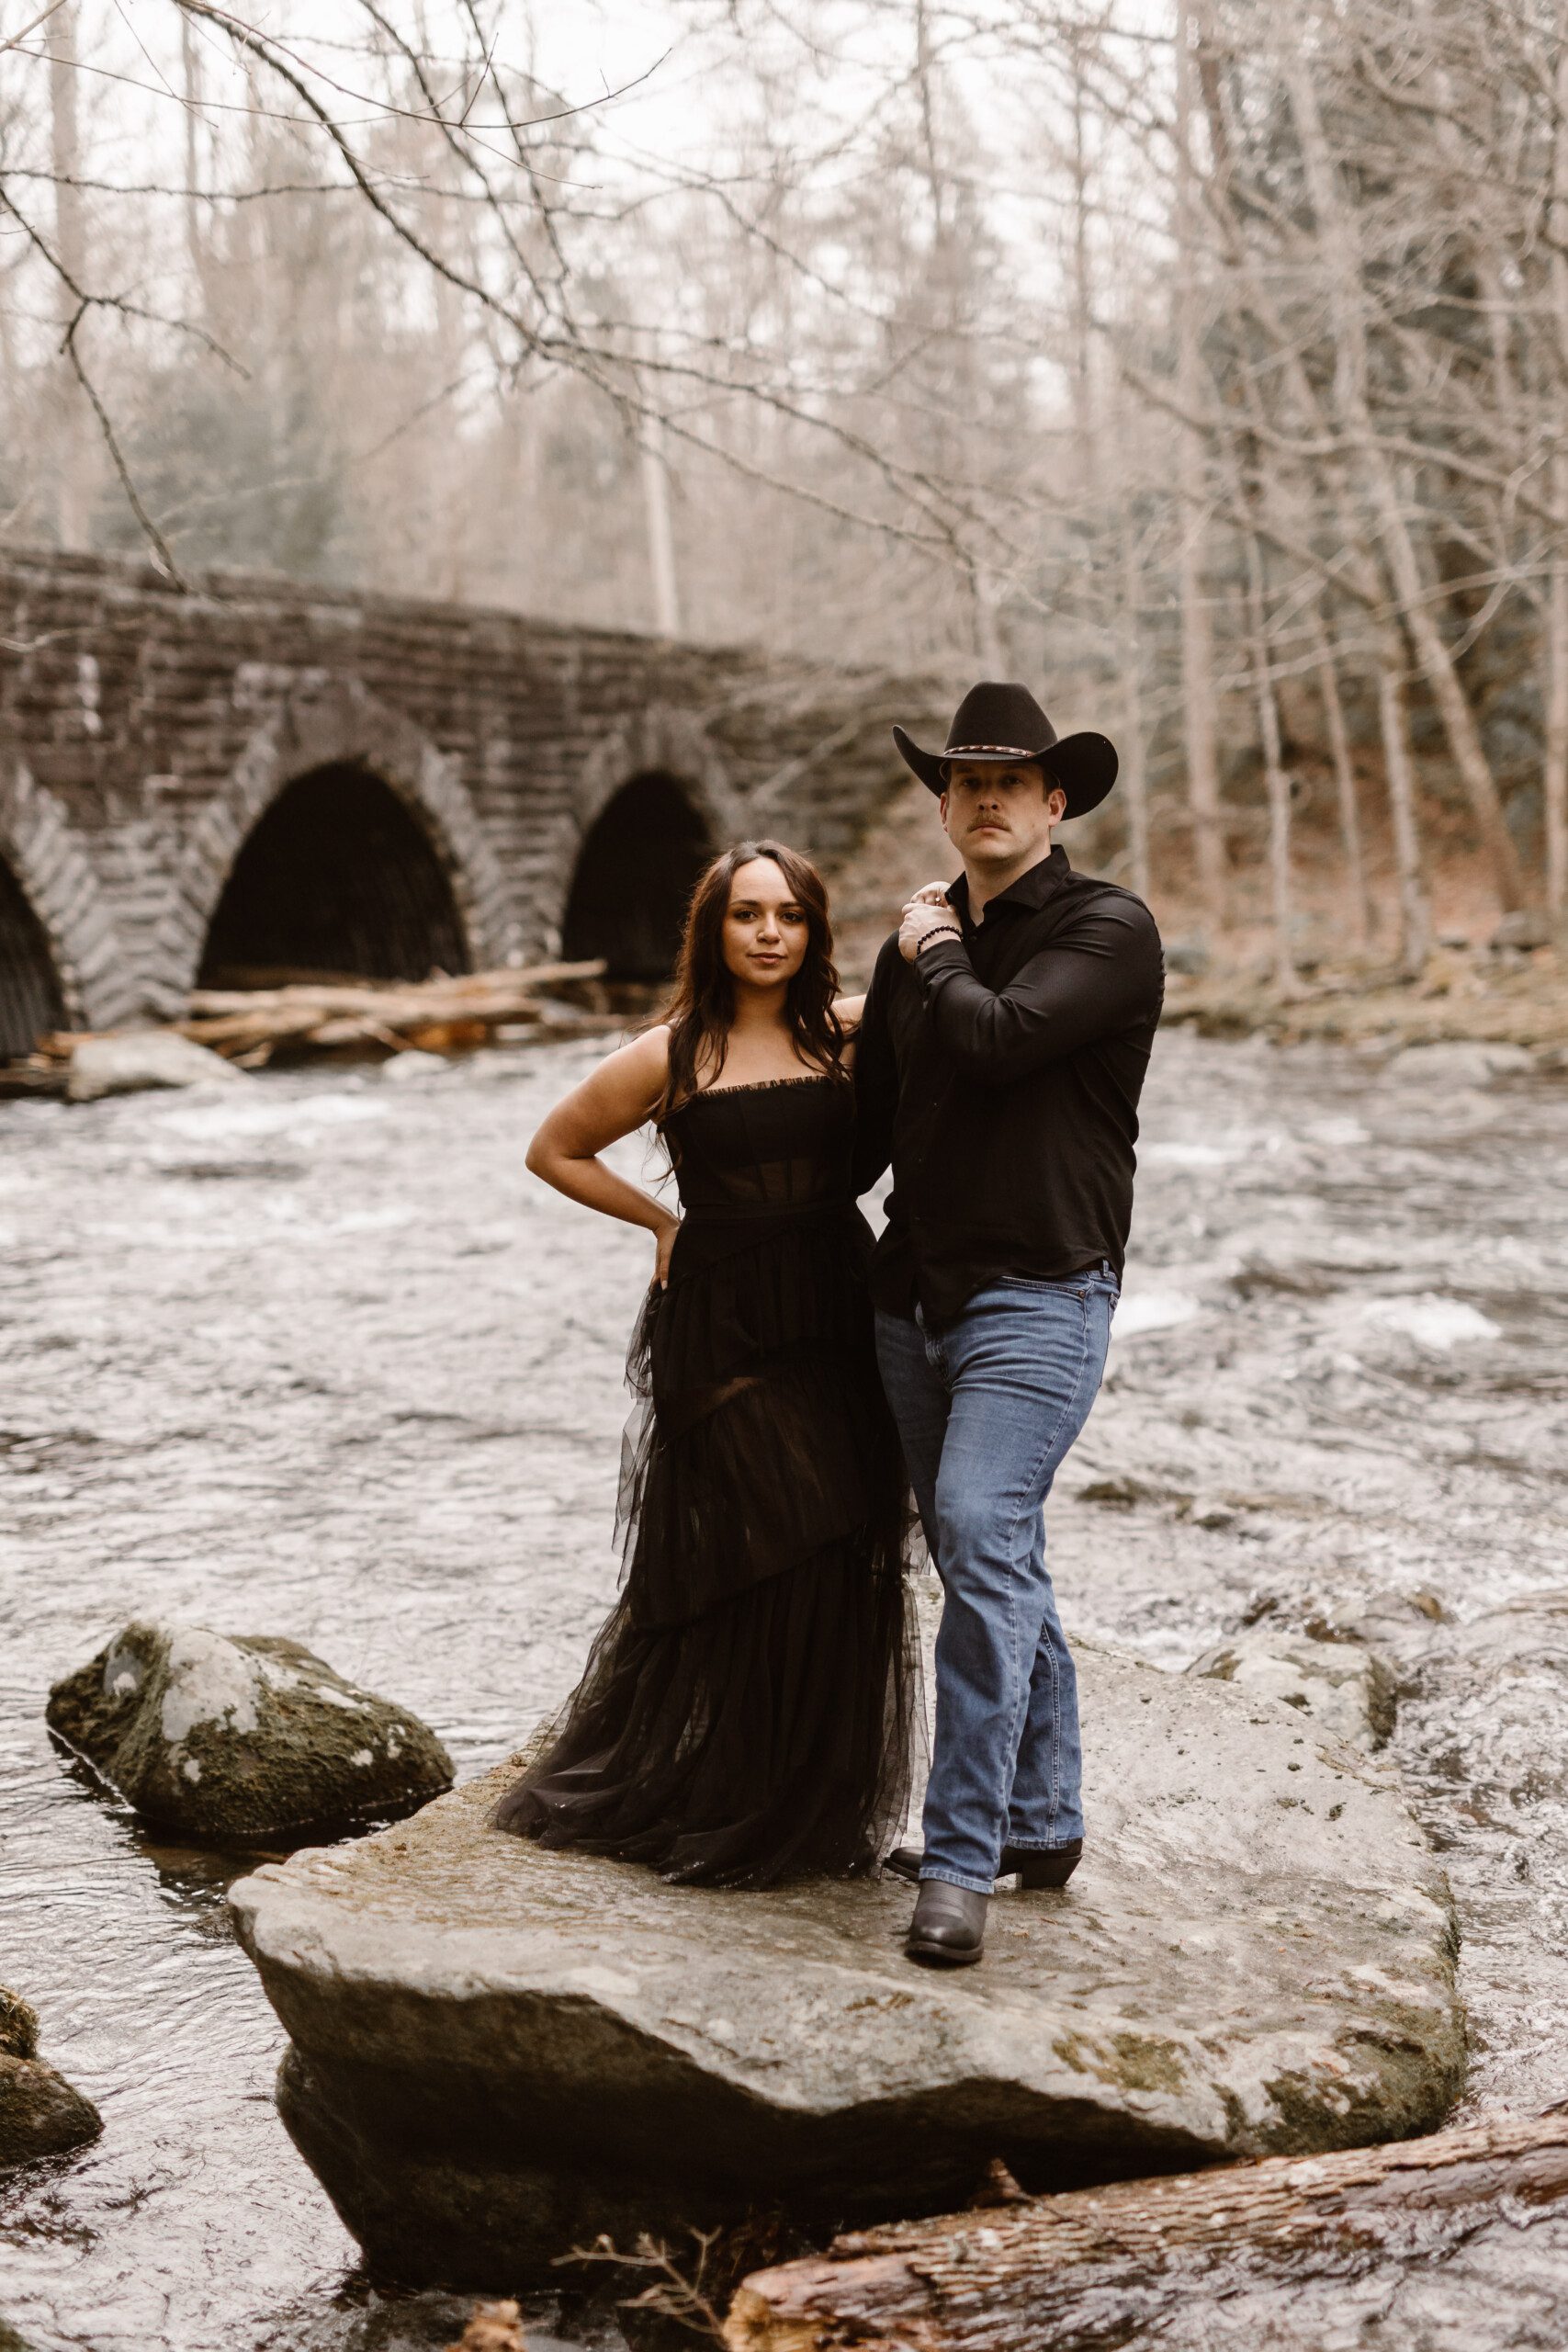 Elkmont Mini-Sessions in the Smokies